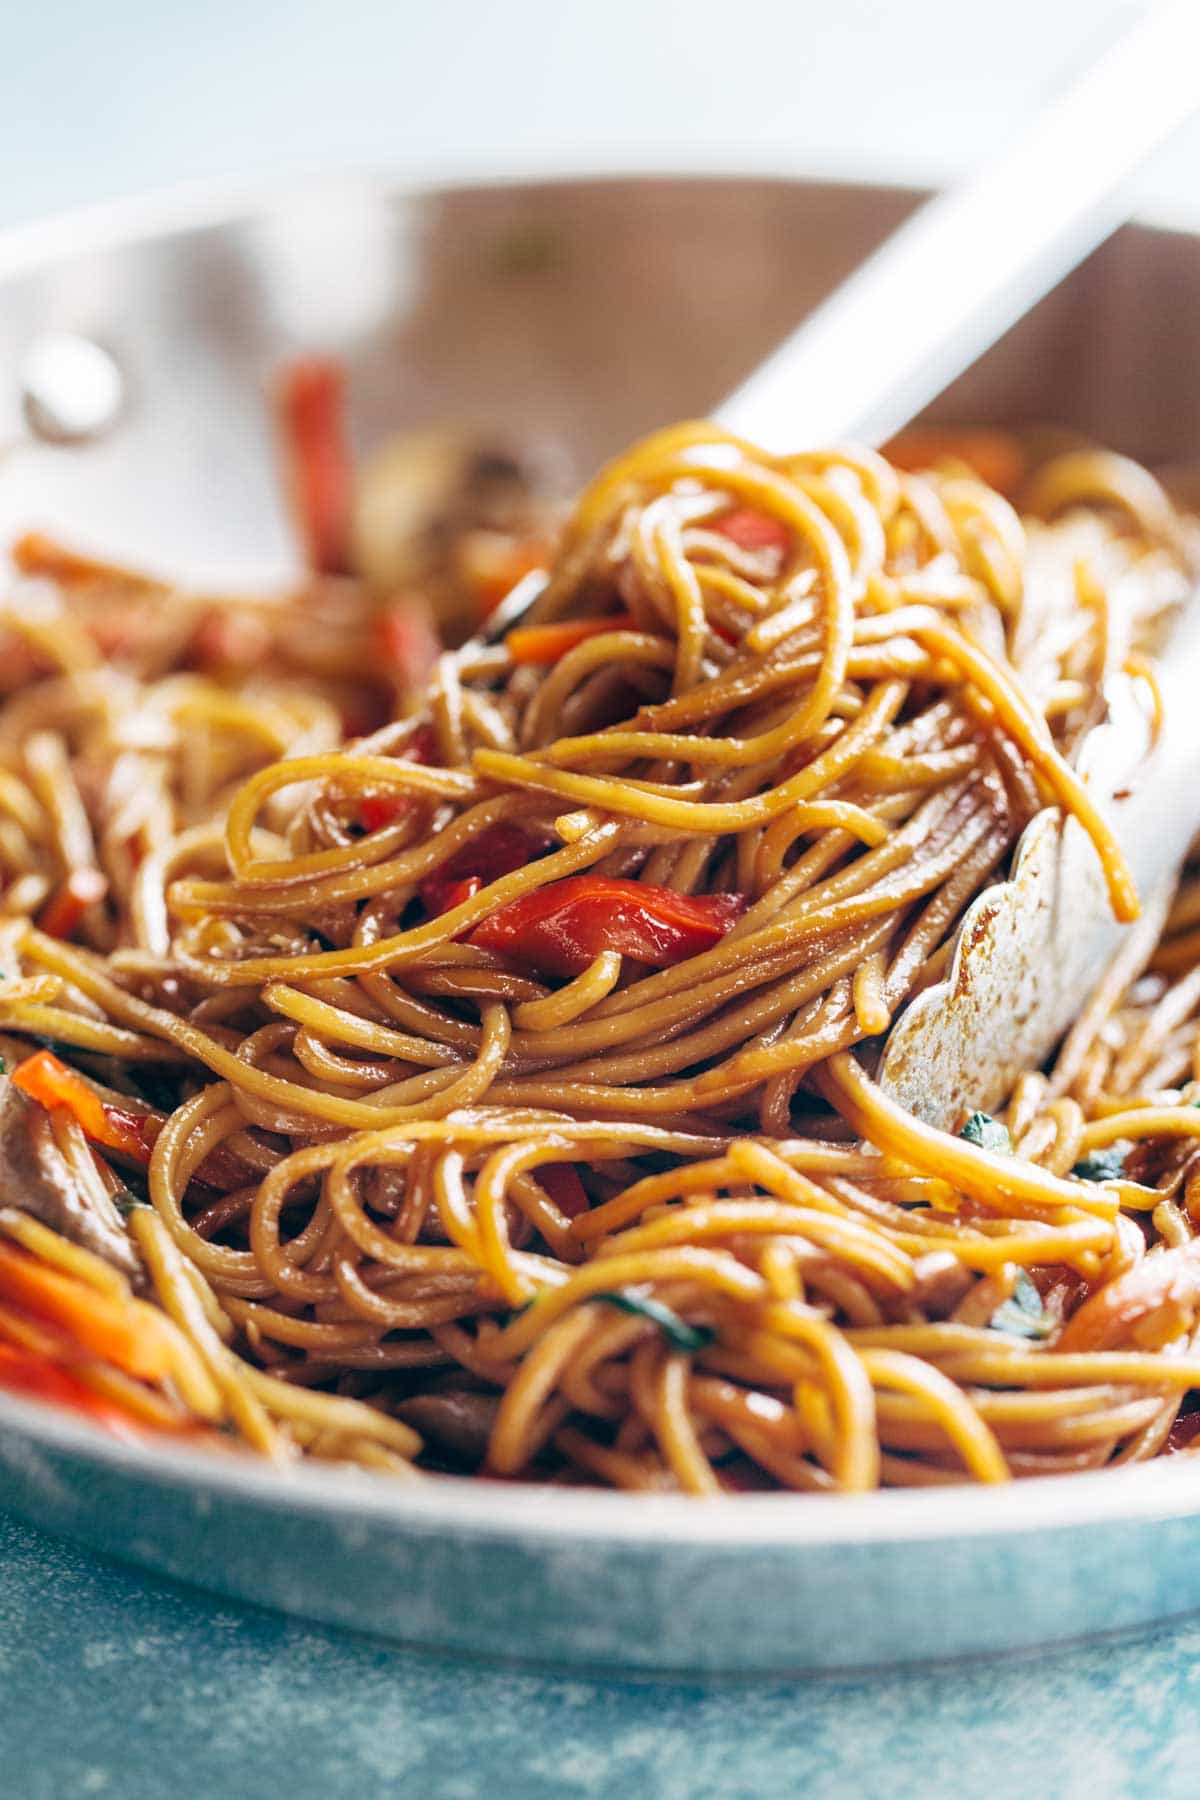 Asian recipes with noodles